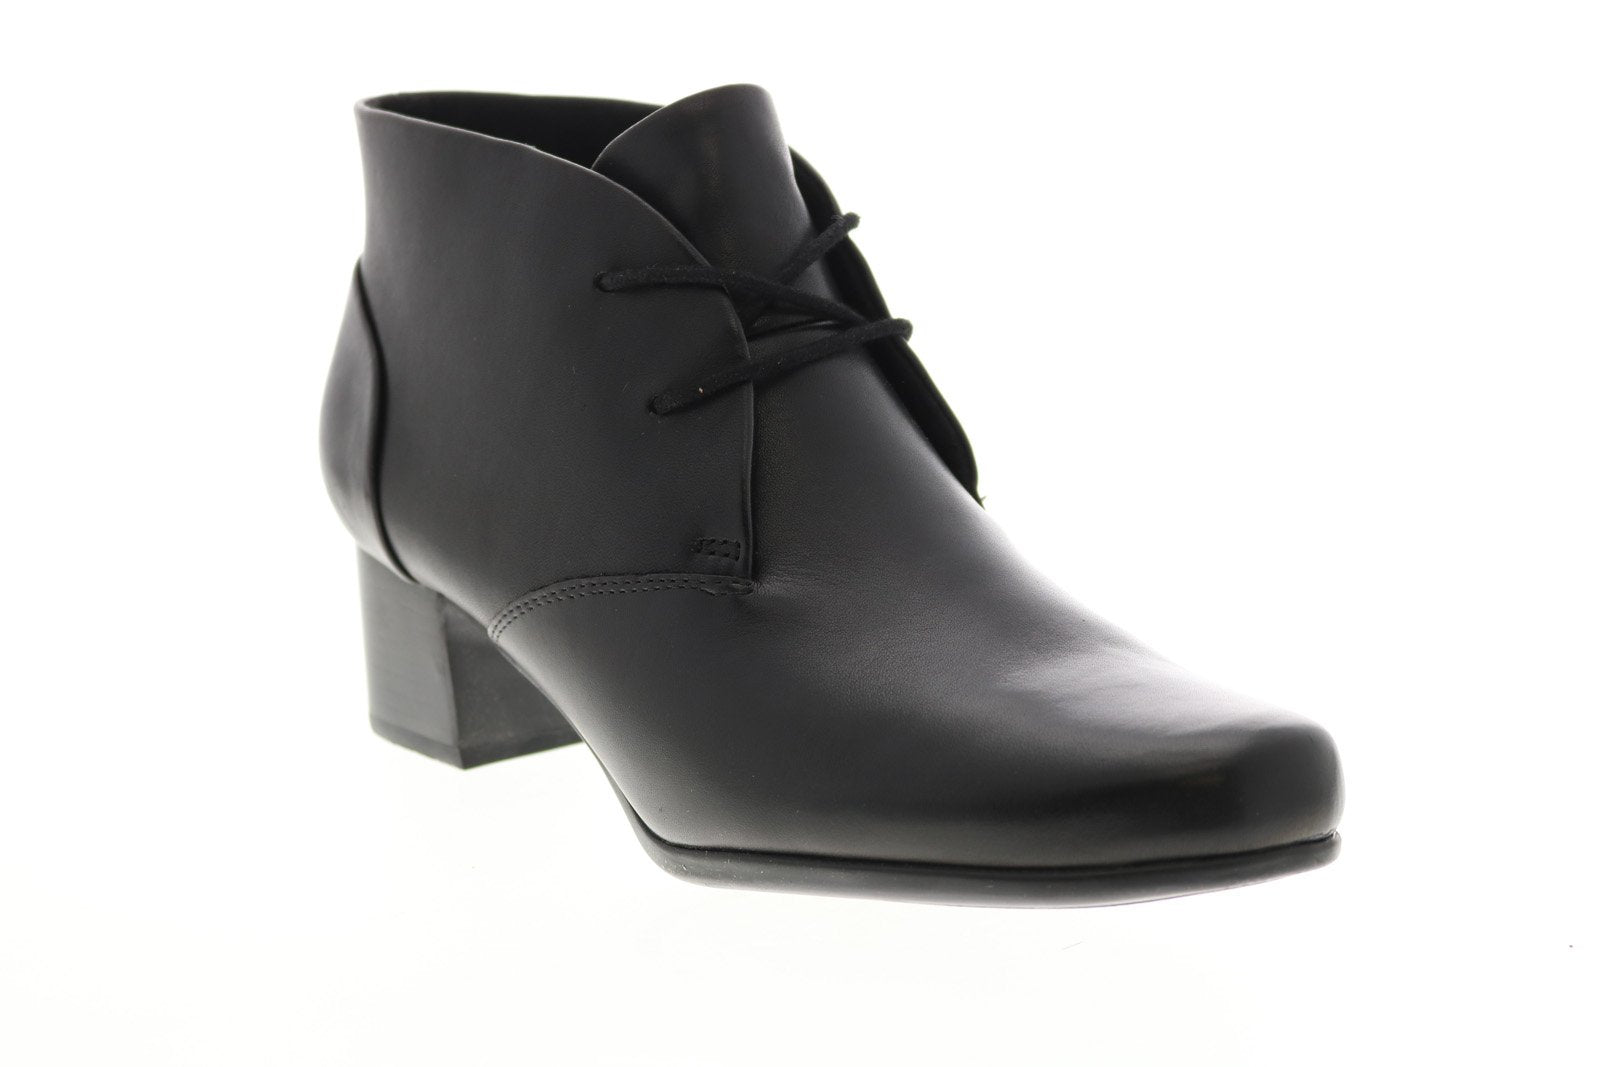 Clarks Un Damson Tie 26146537 Womens Black Leather Ankle & Booties Boo ...